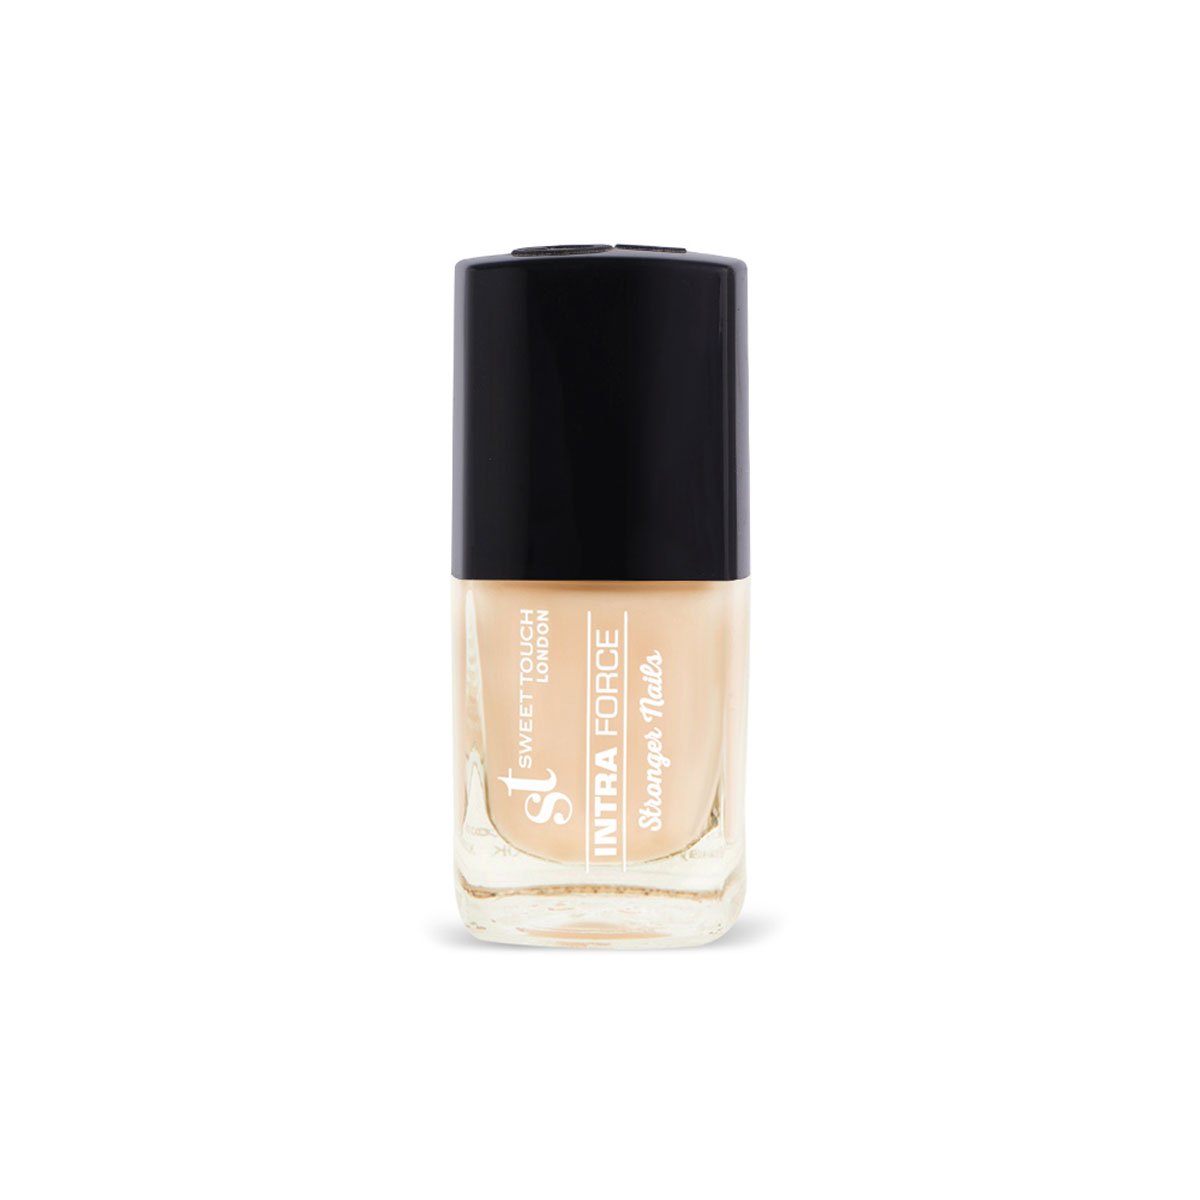 St London - Nail Treatment - 095 - Intra Force